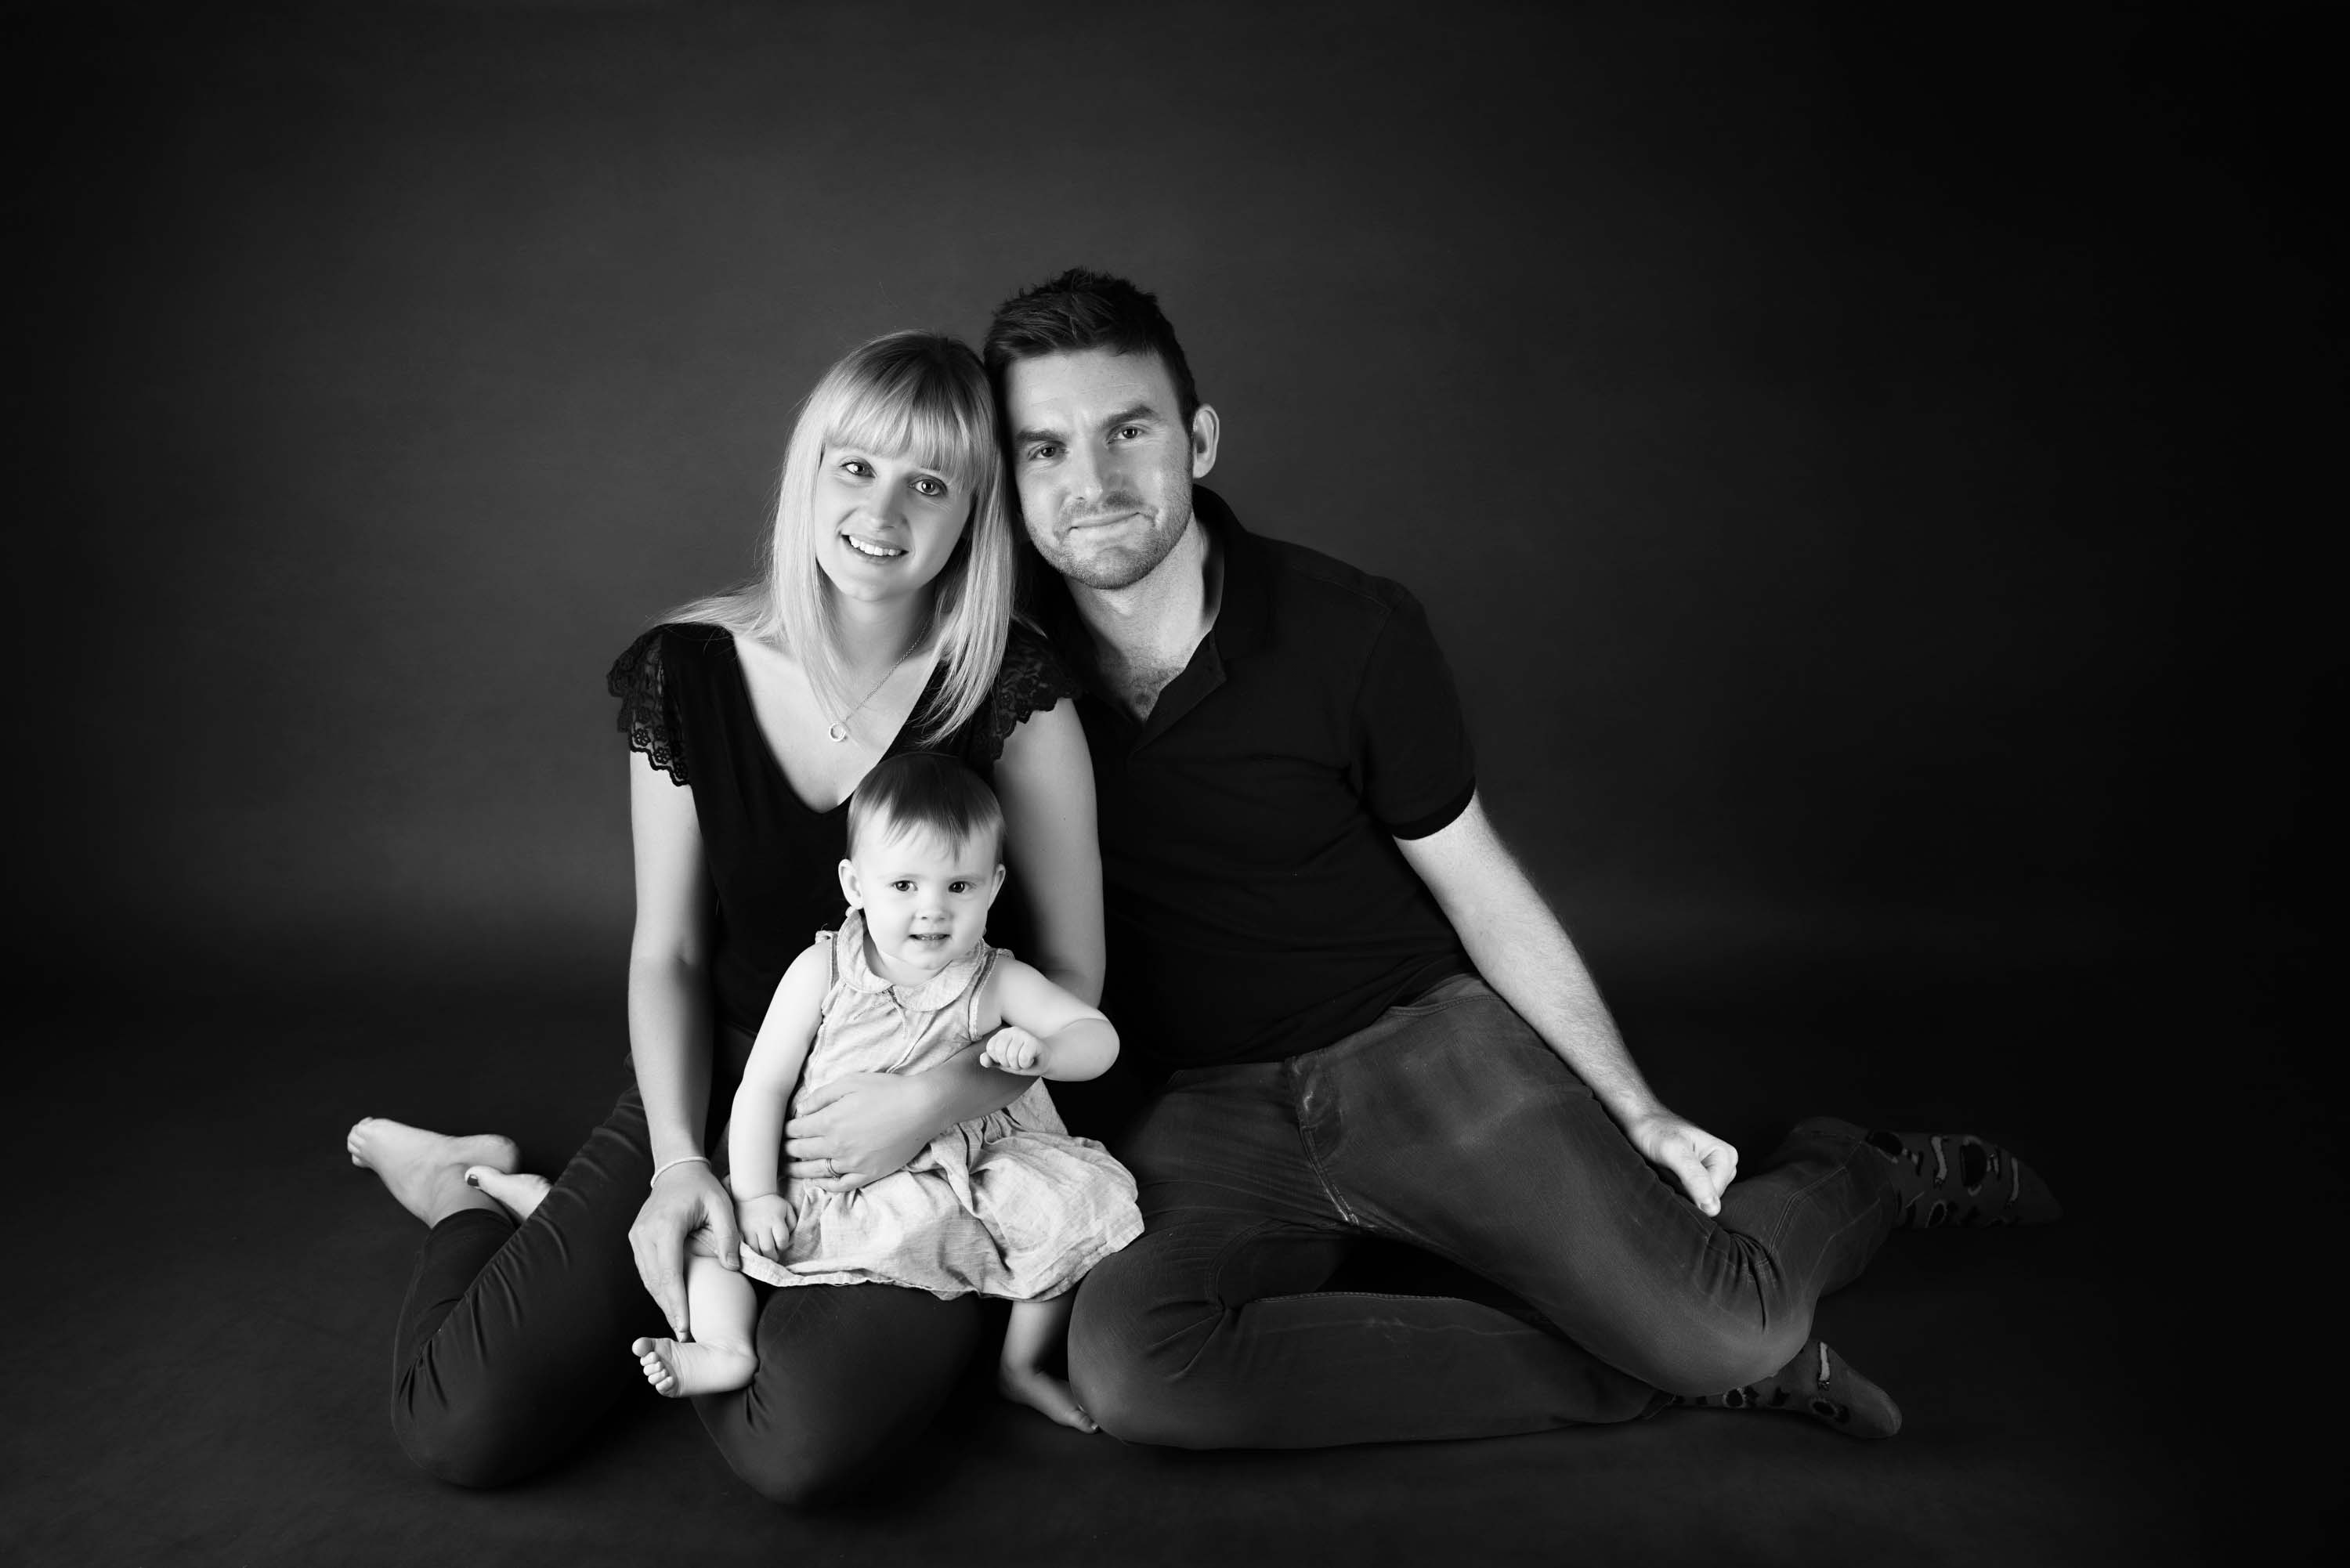 Family portrait of mum, dad and daughter at her cake smash photoshoot